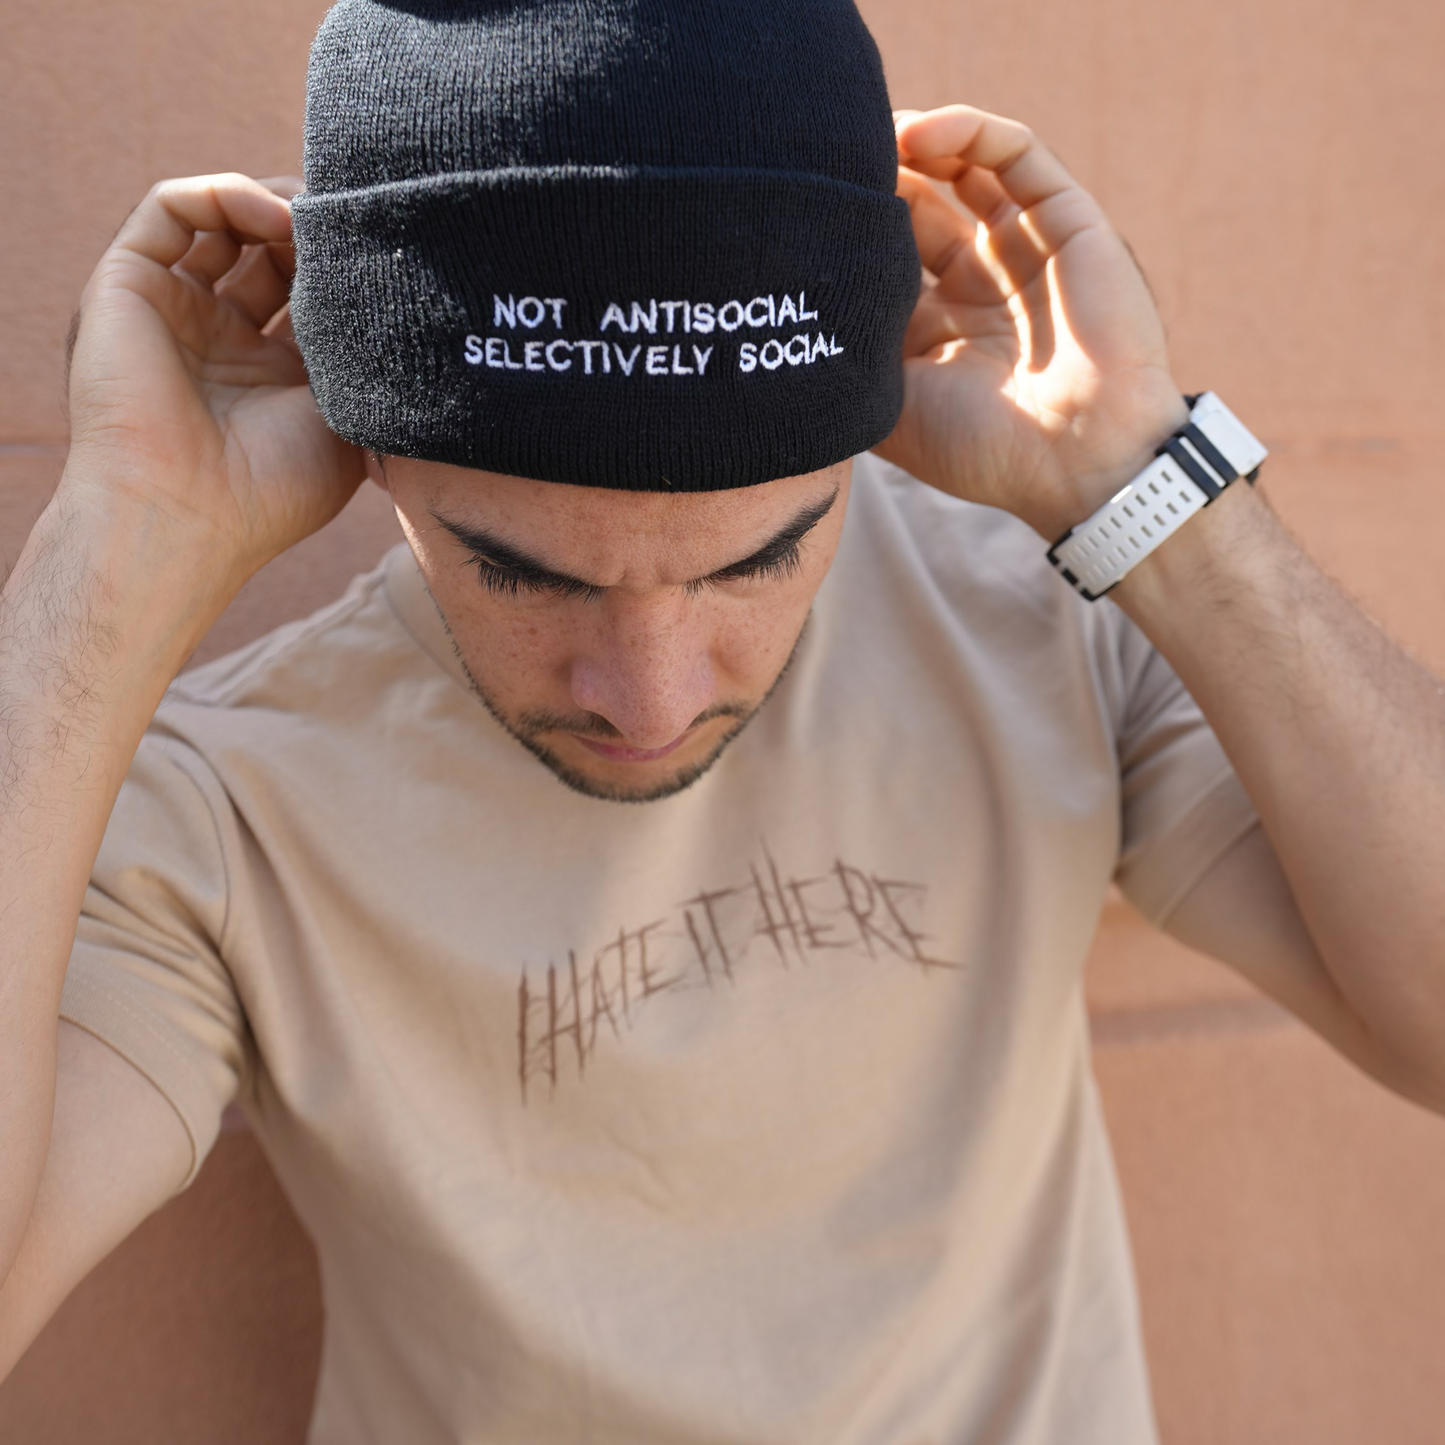 Hate it Here v2 Midweight Tee